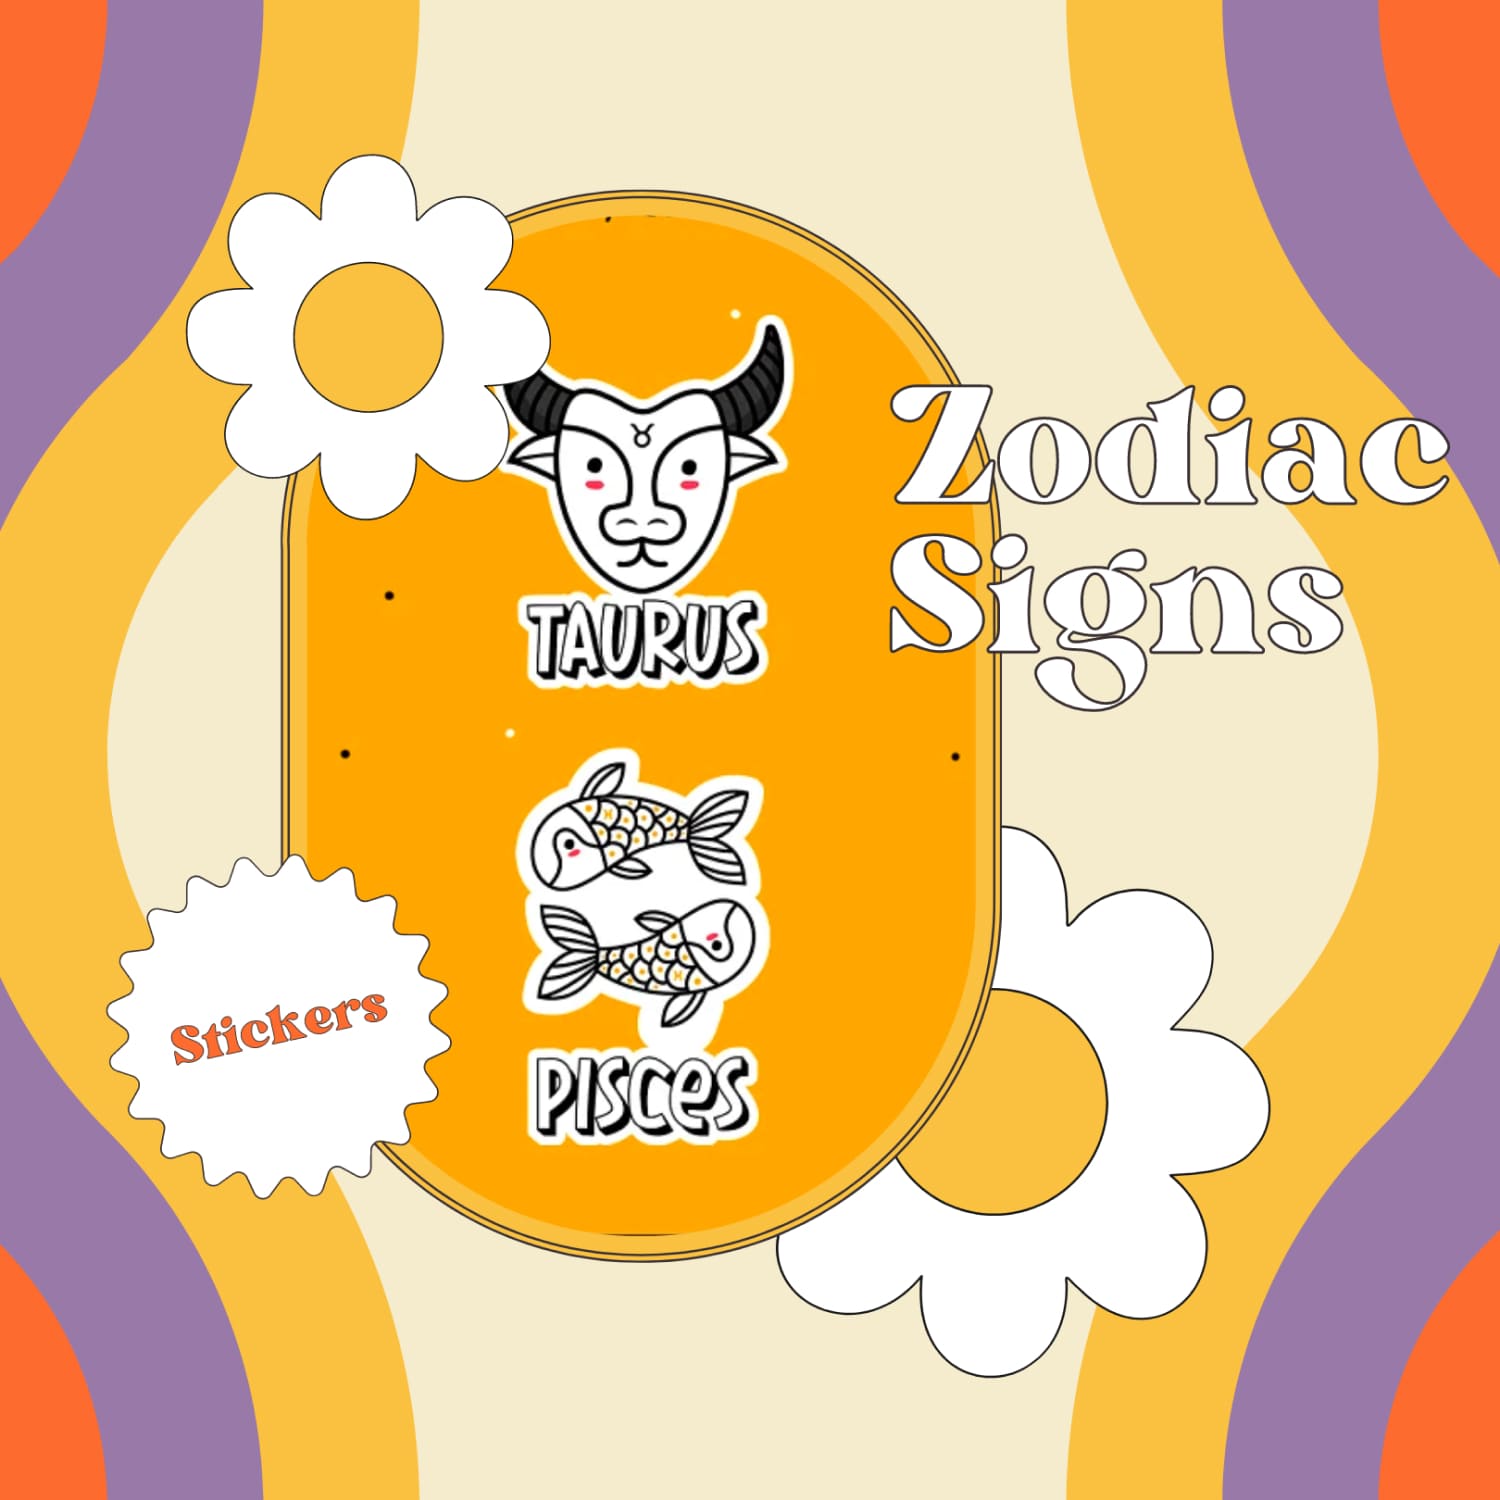 Zodiac Signs Stickers - main image preview.